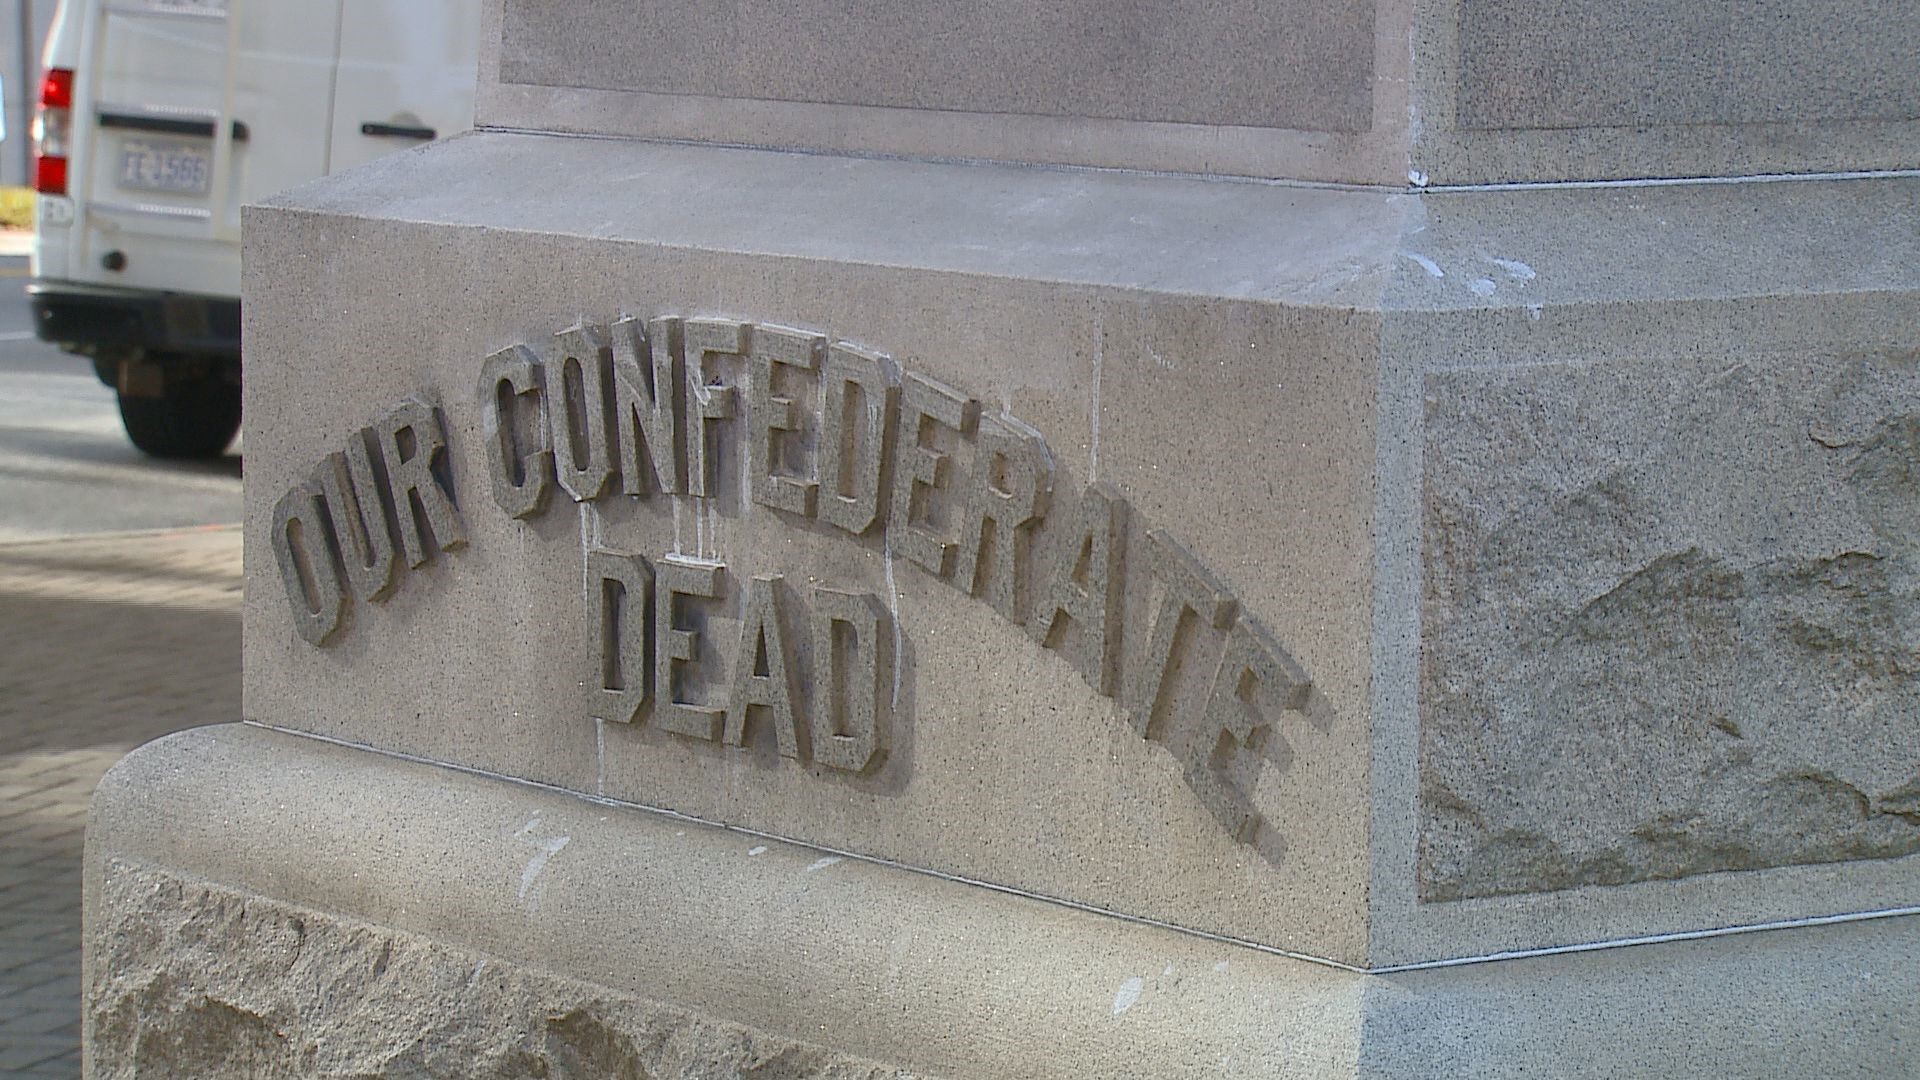 Police are investigating an act of vandalism of a Confederate monument in Winston-Salem